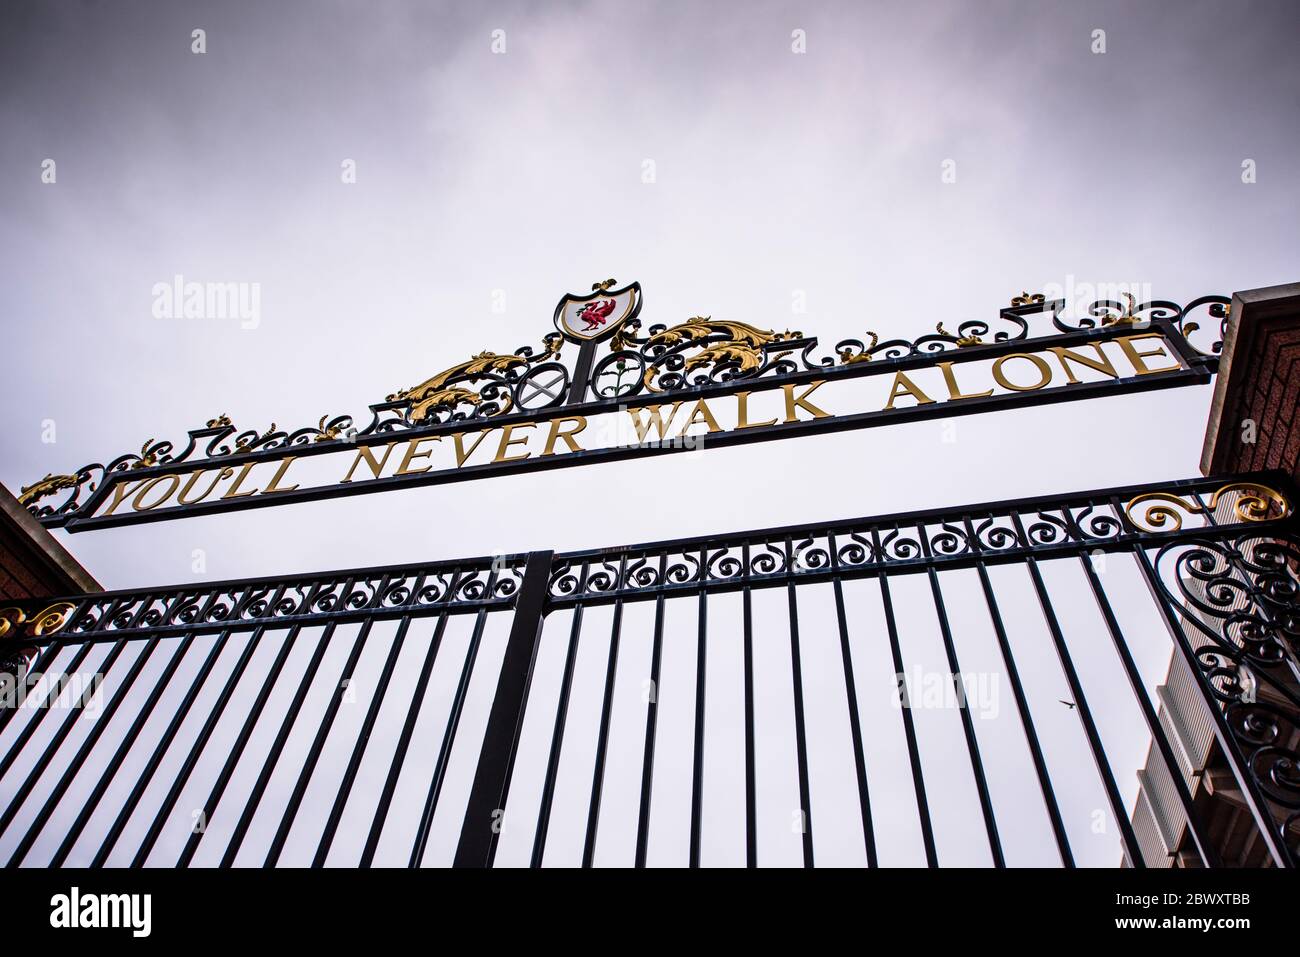 You'll Never Walk Alone. Bill Shankly Memorial Gate. Anfield, Liverpool, United Kingdom. Stock Photo